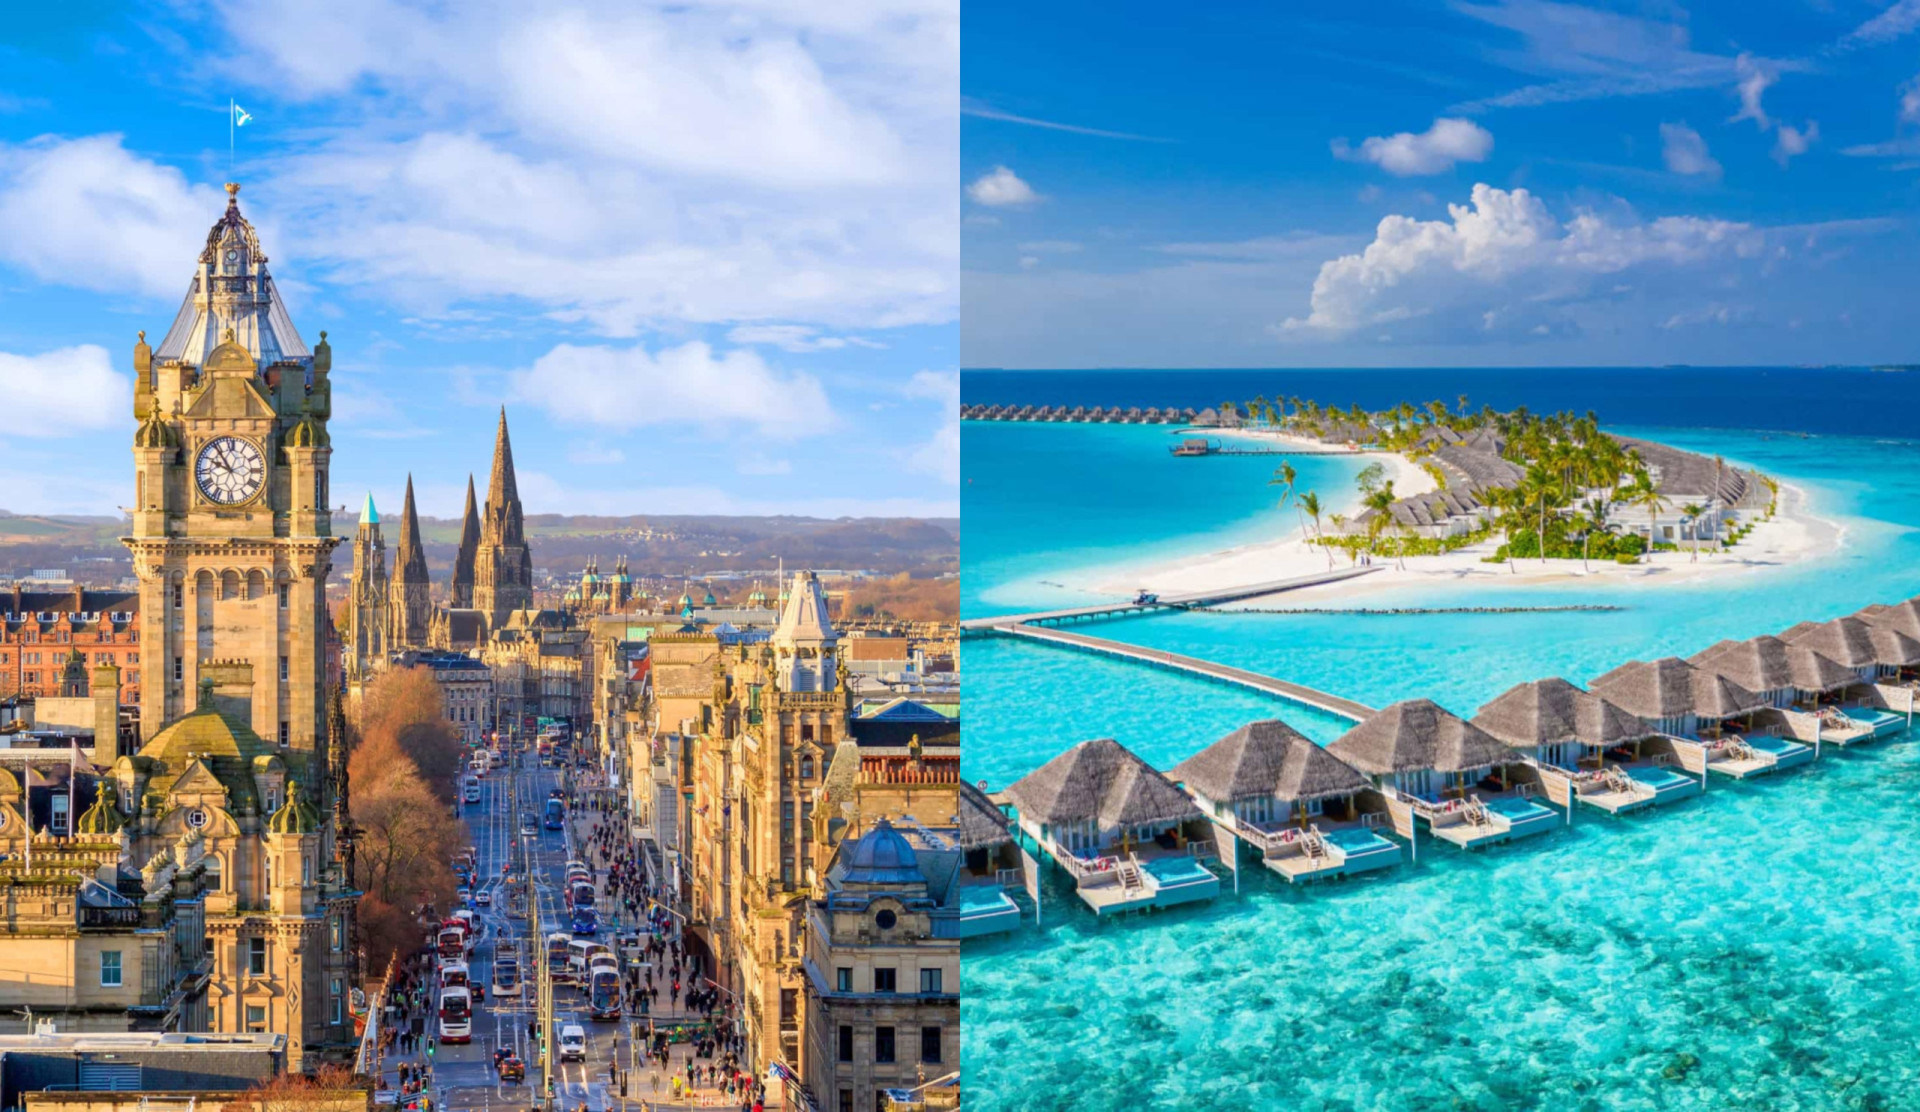 The best travel destinations based on your zodiac sign